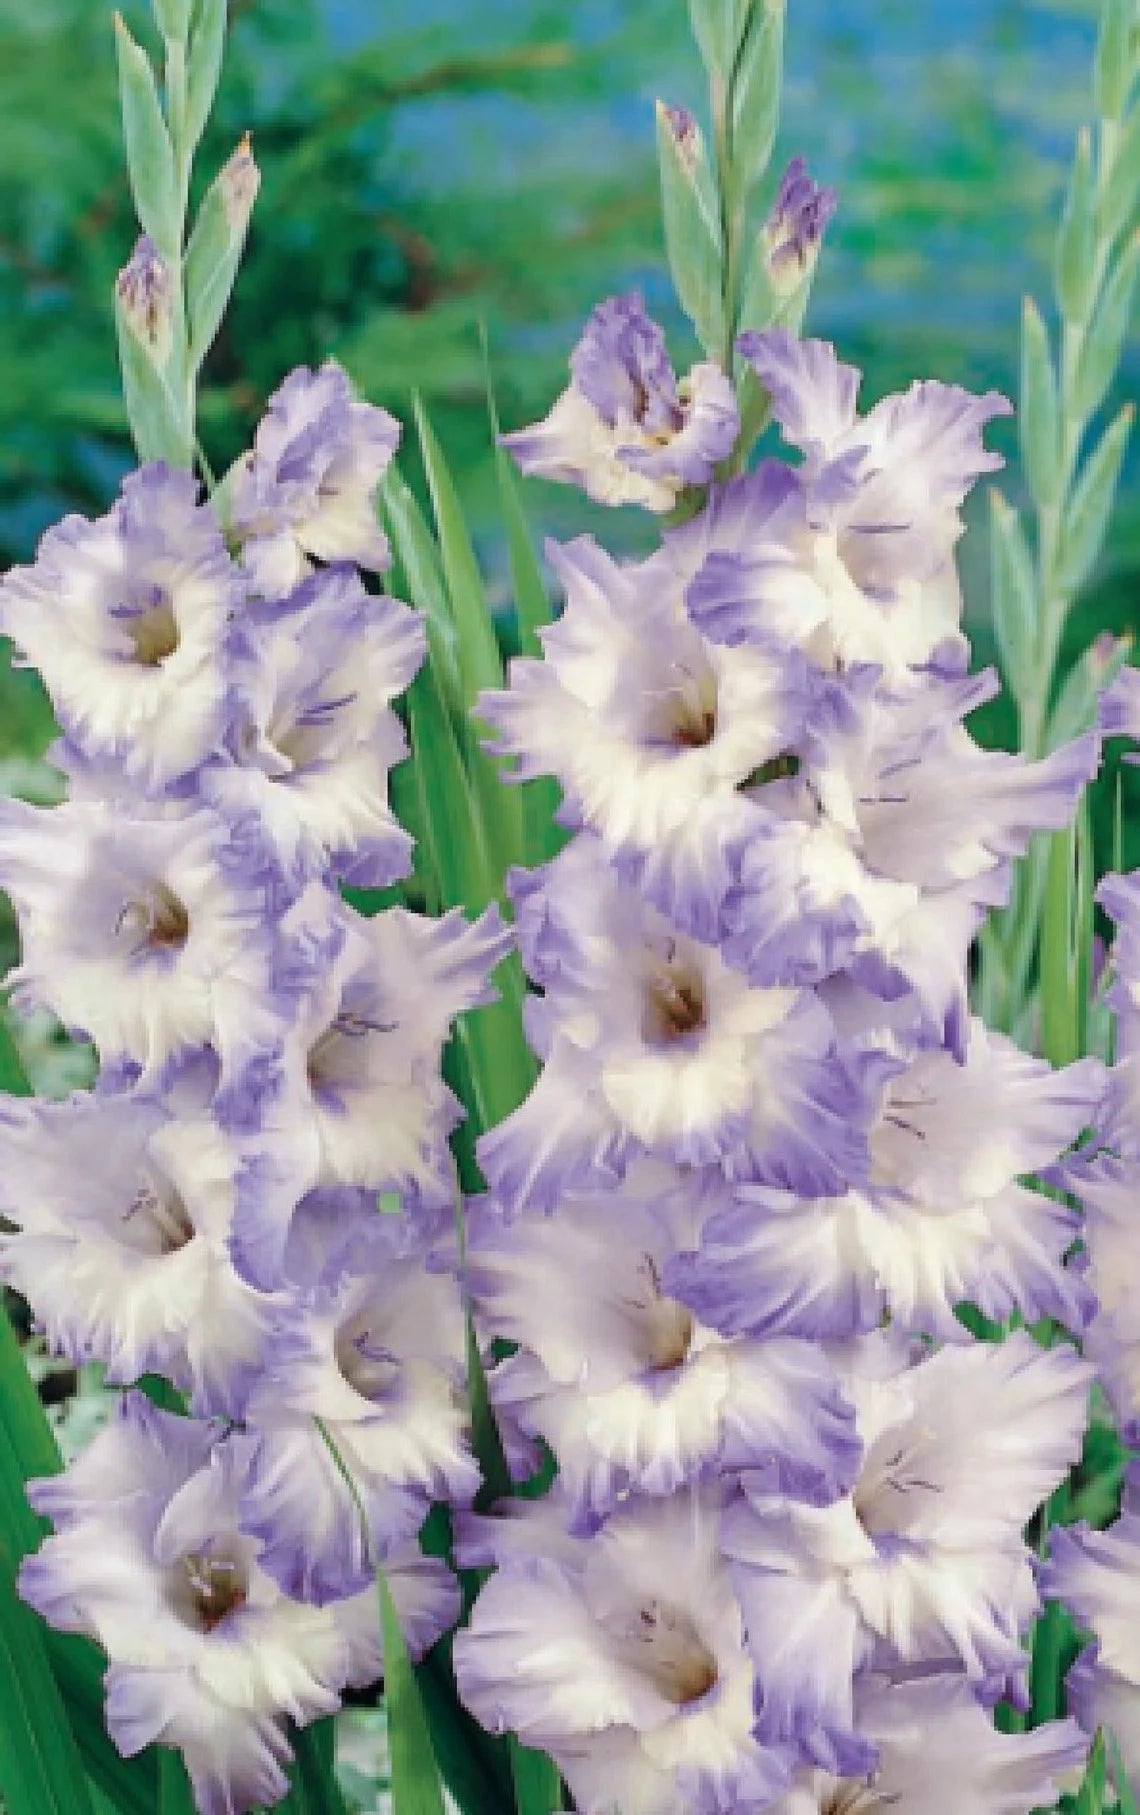 Gladiolus-Rippling waters novelty